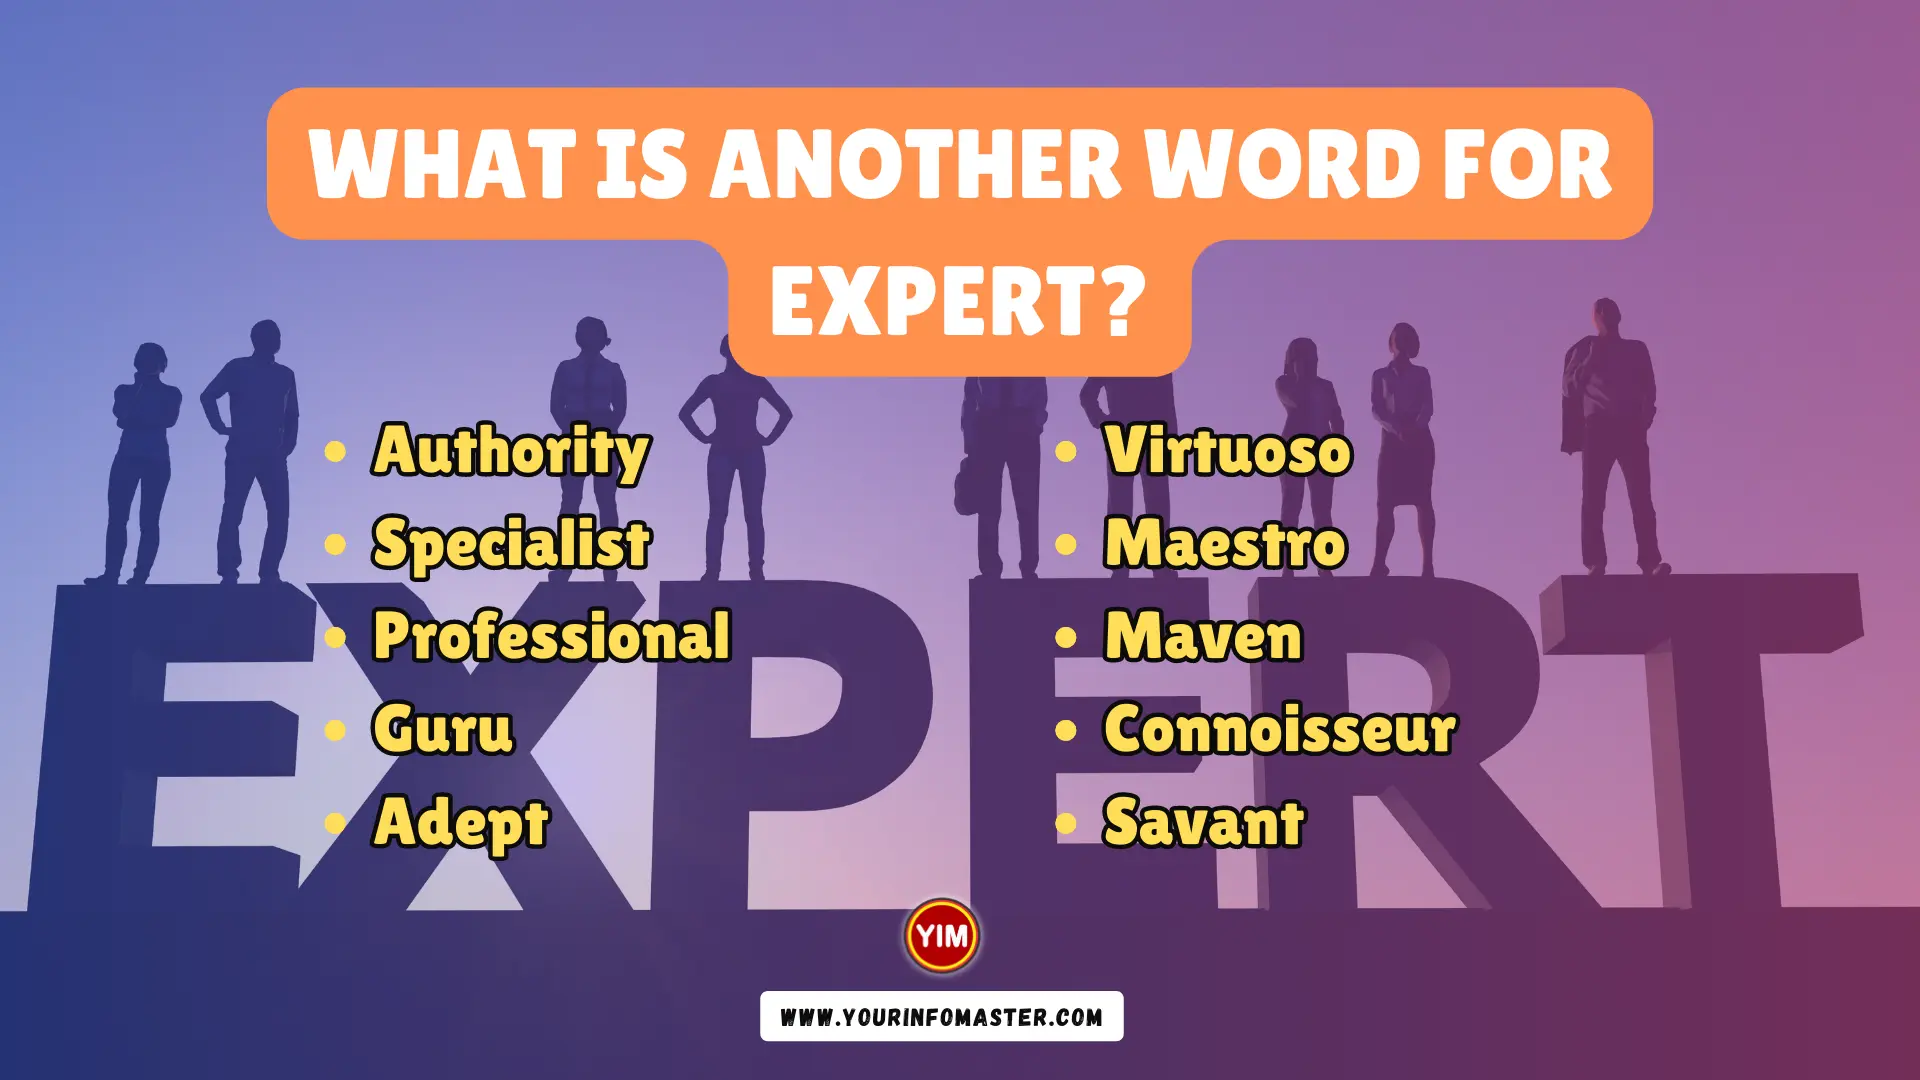 What is another word for Expert